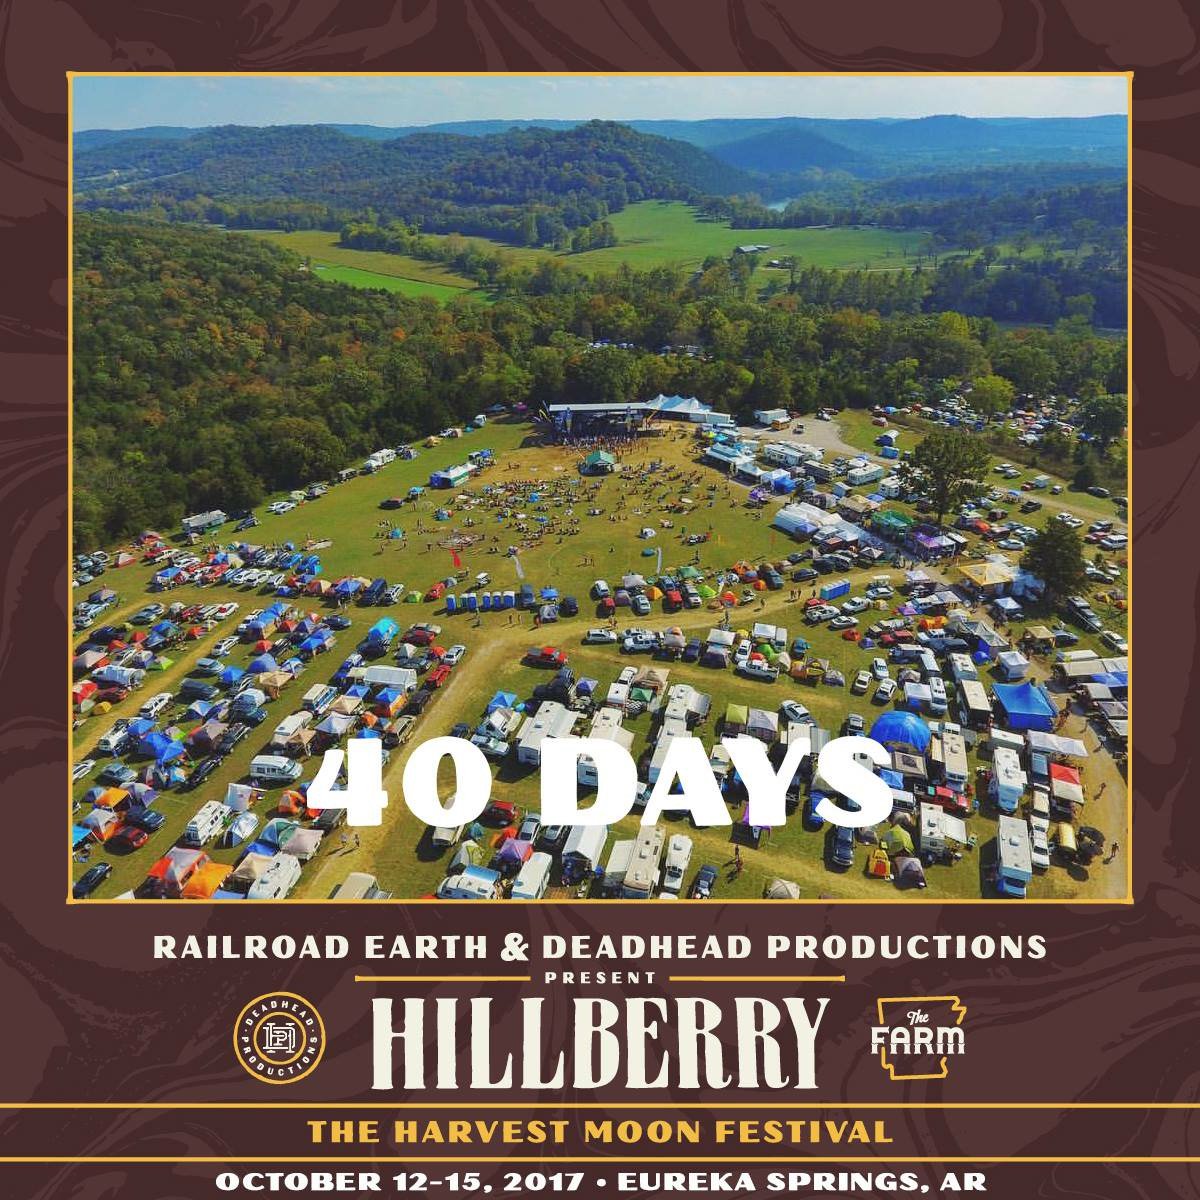 #Hillberry2017 is just 40 days away! This lineup features #Railroad Earth 2x, #GSBG, #YMSB, #LeftoverSalmon, & More! Photo: Kyler Brown